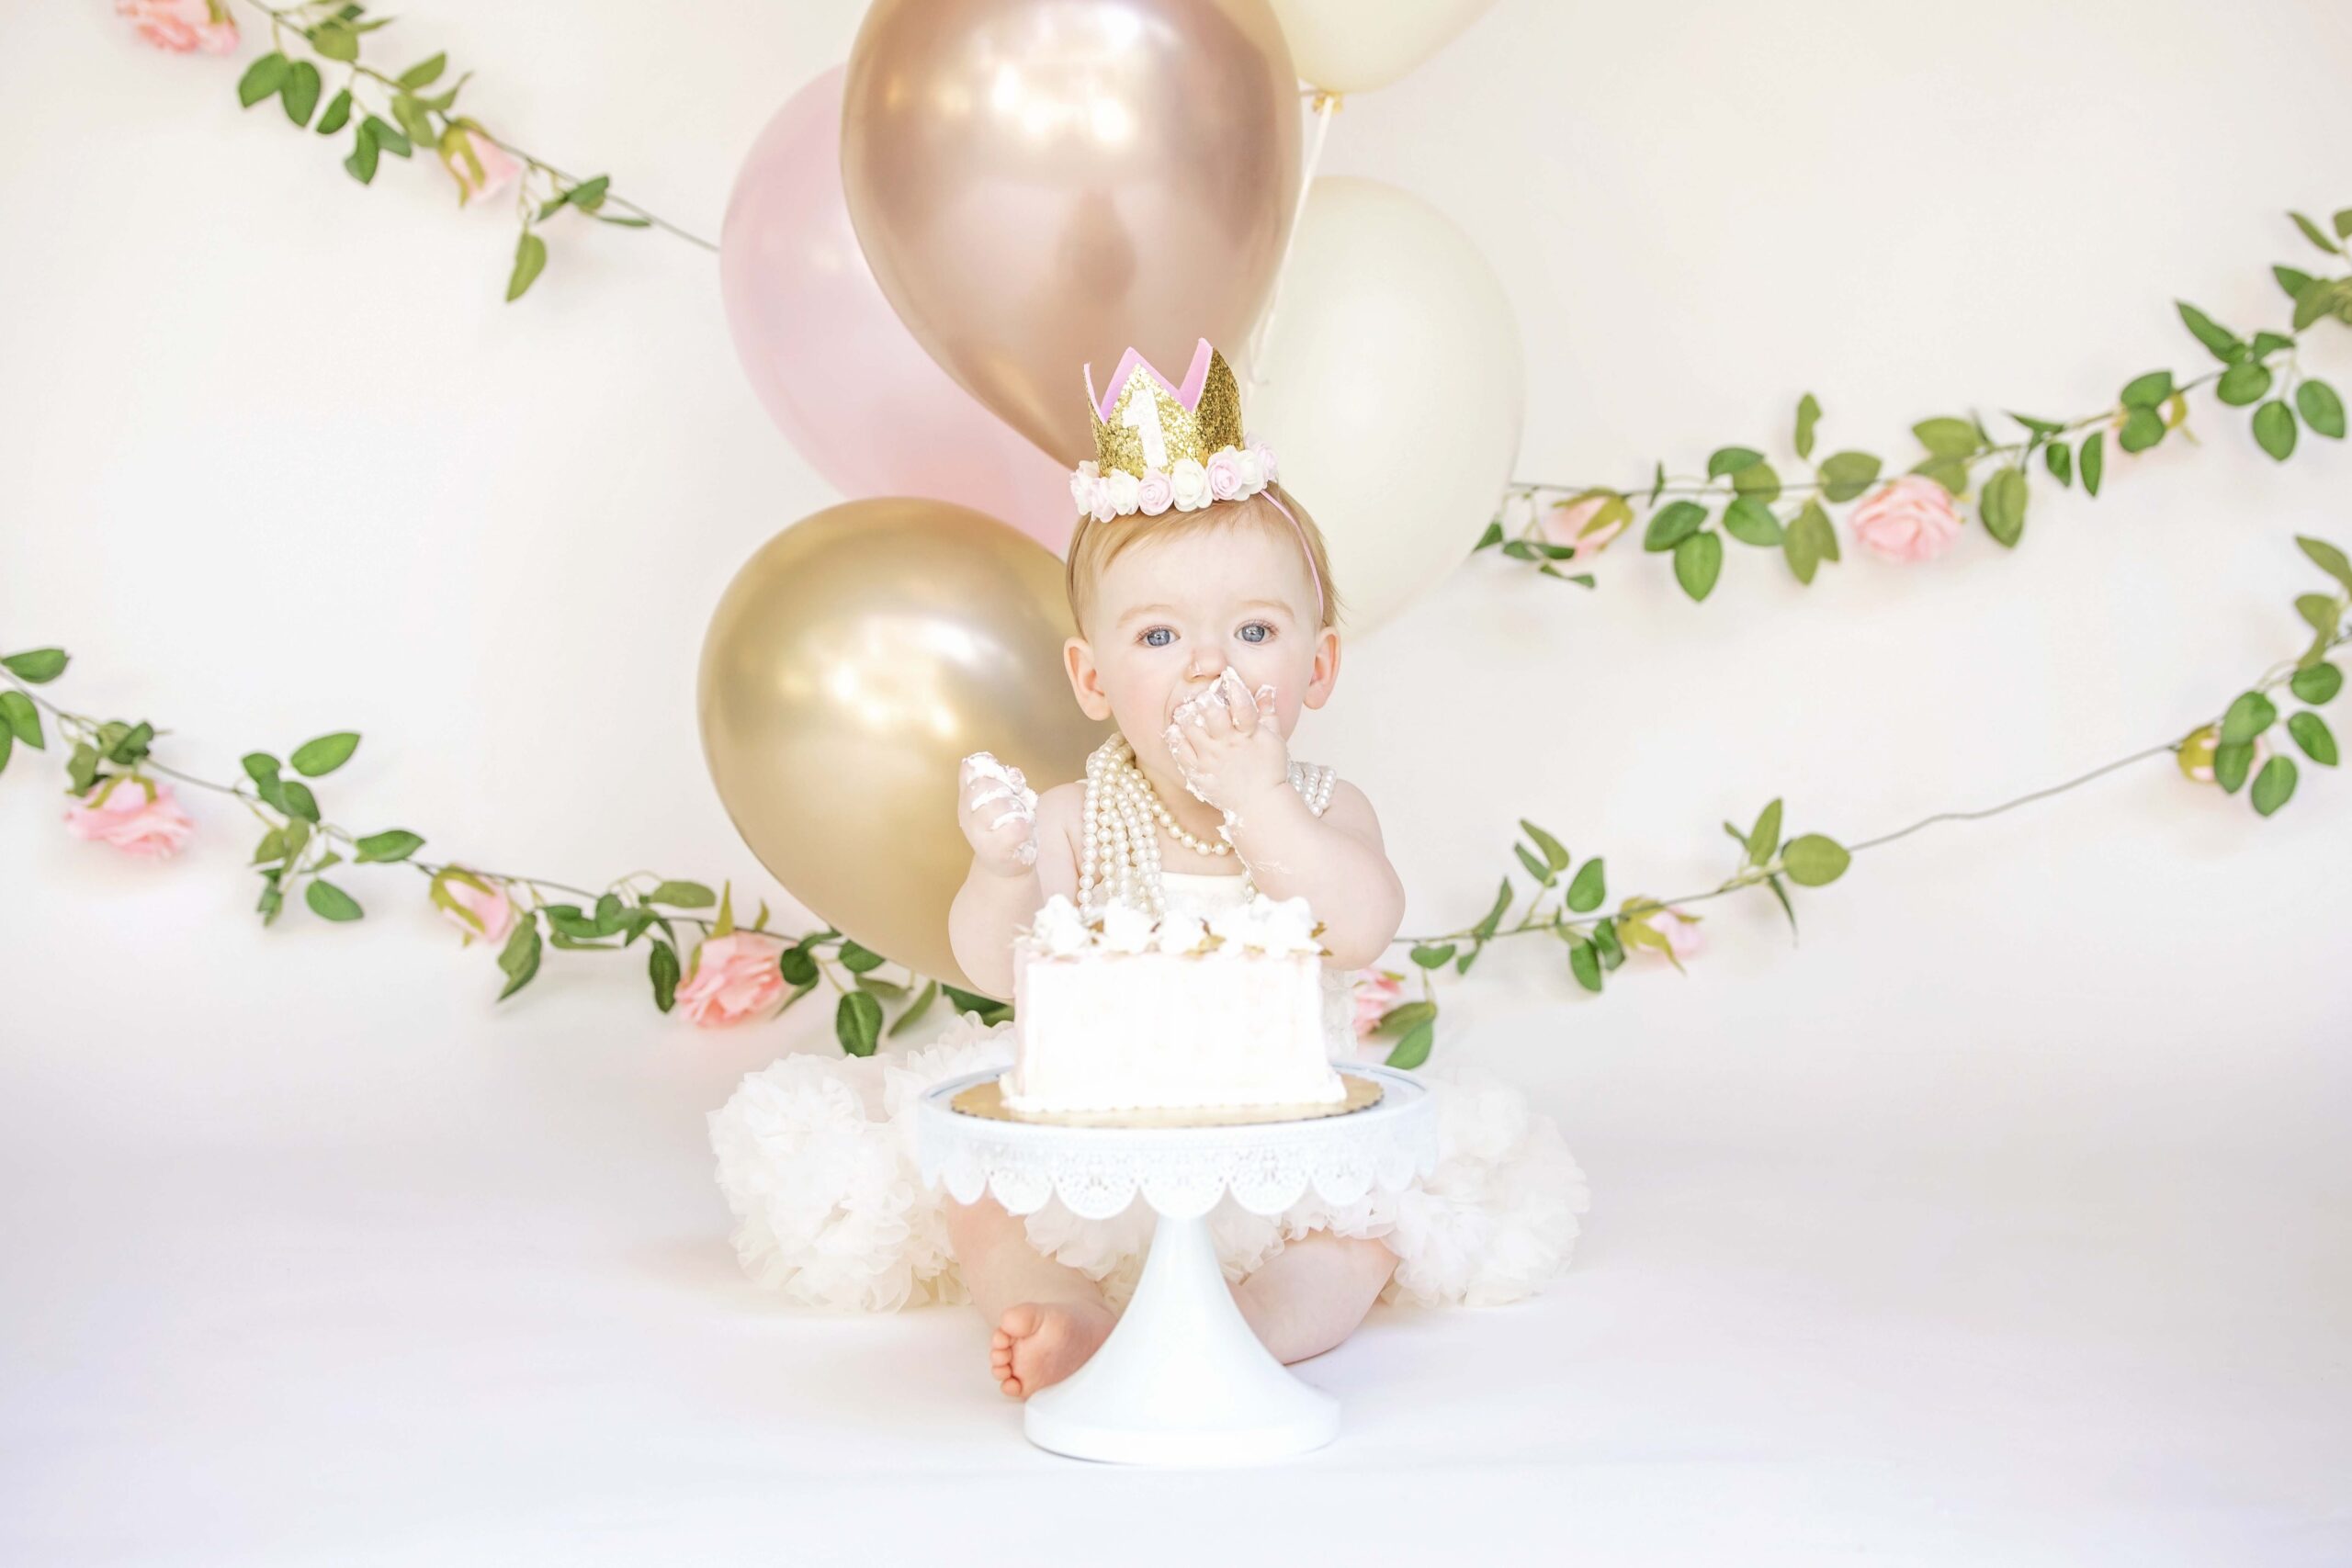 One year old girl tasting her birthday cake in front of gold balloons and a floral garland